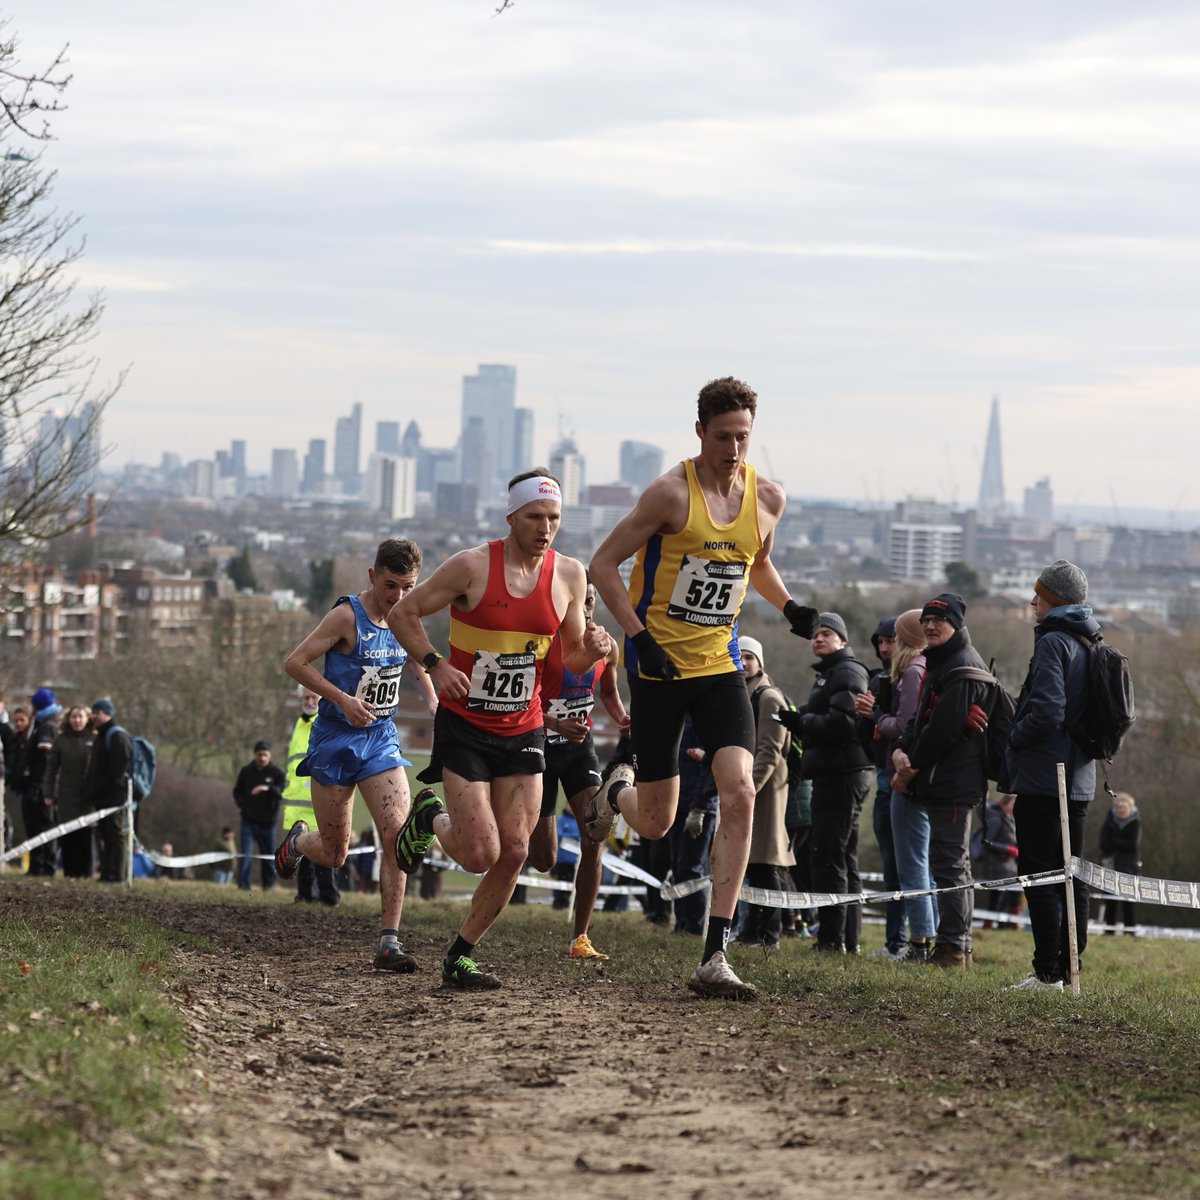 On top at London Cross Challenge 🙌 Hugo Milner takes the win in the men’s senior 10km clocking 29:58 at Parliament Hill 💨 📸 @James_Athletics | #muddybrilliant